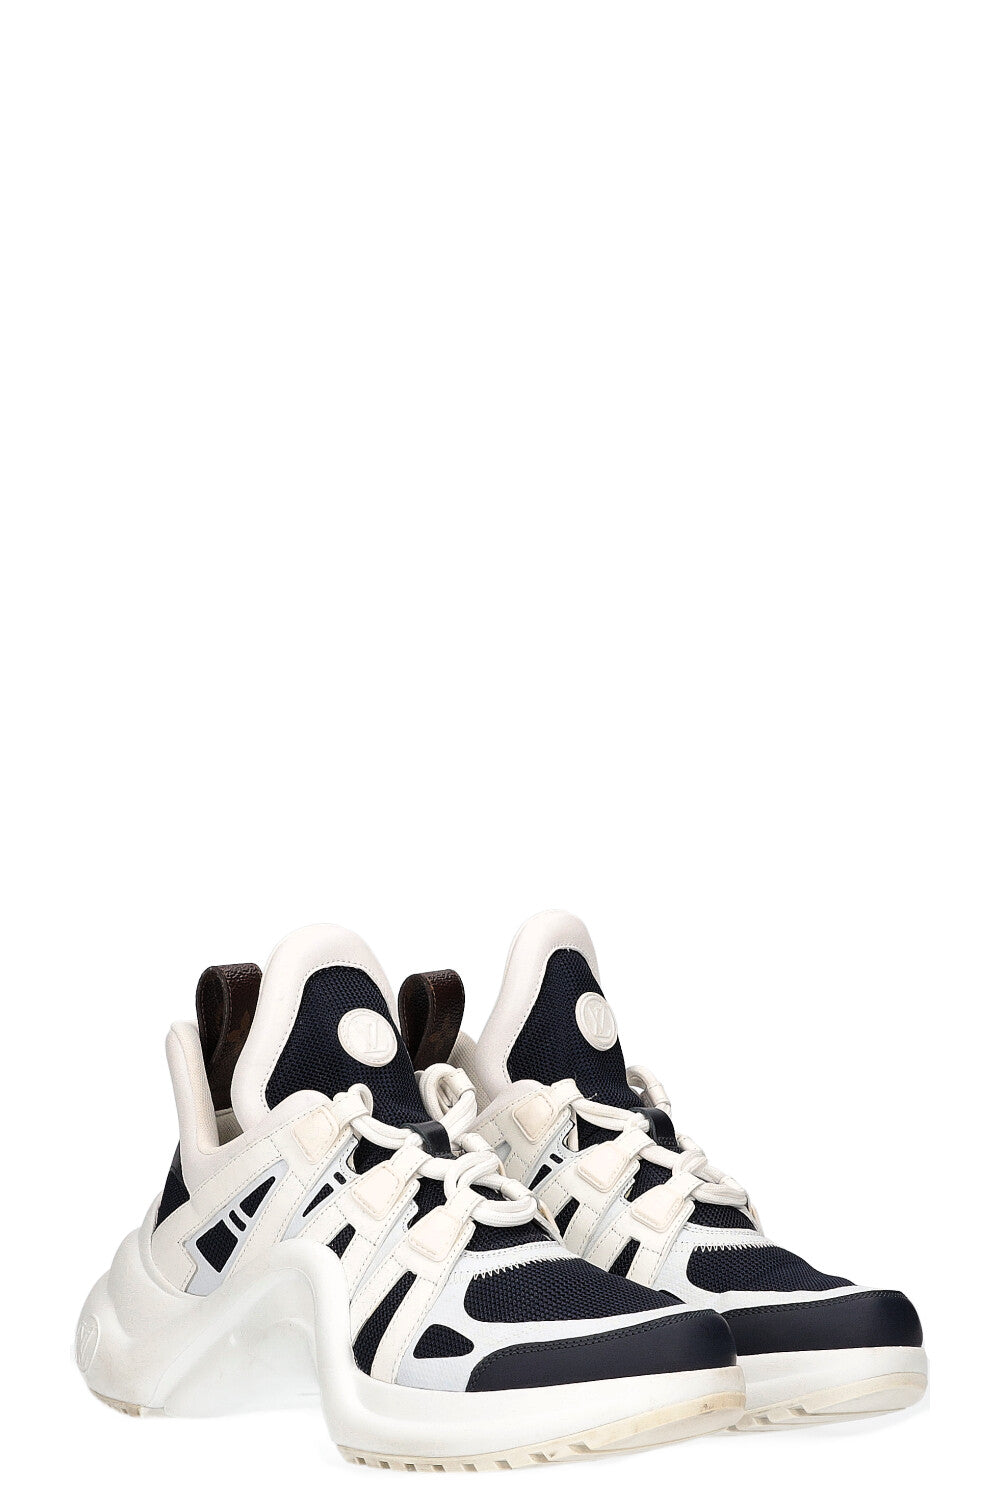 louis vuitton archlight sneakers black and white